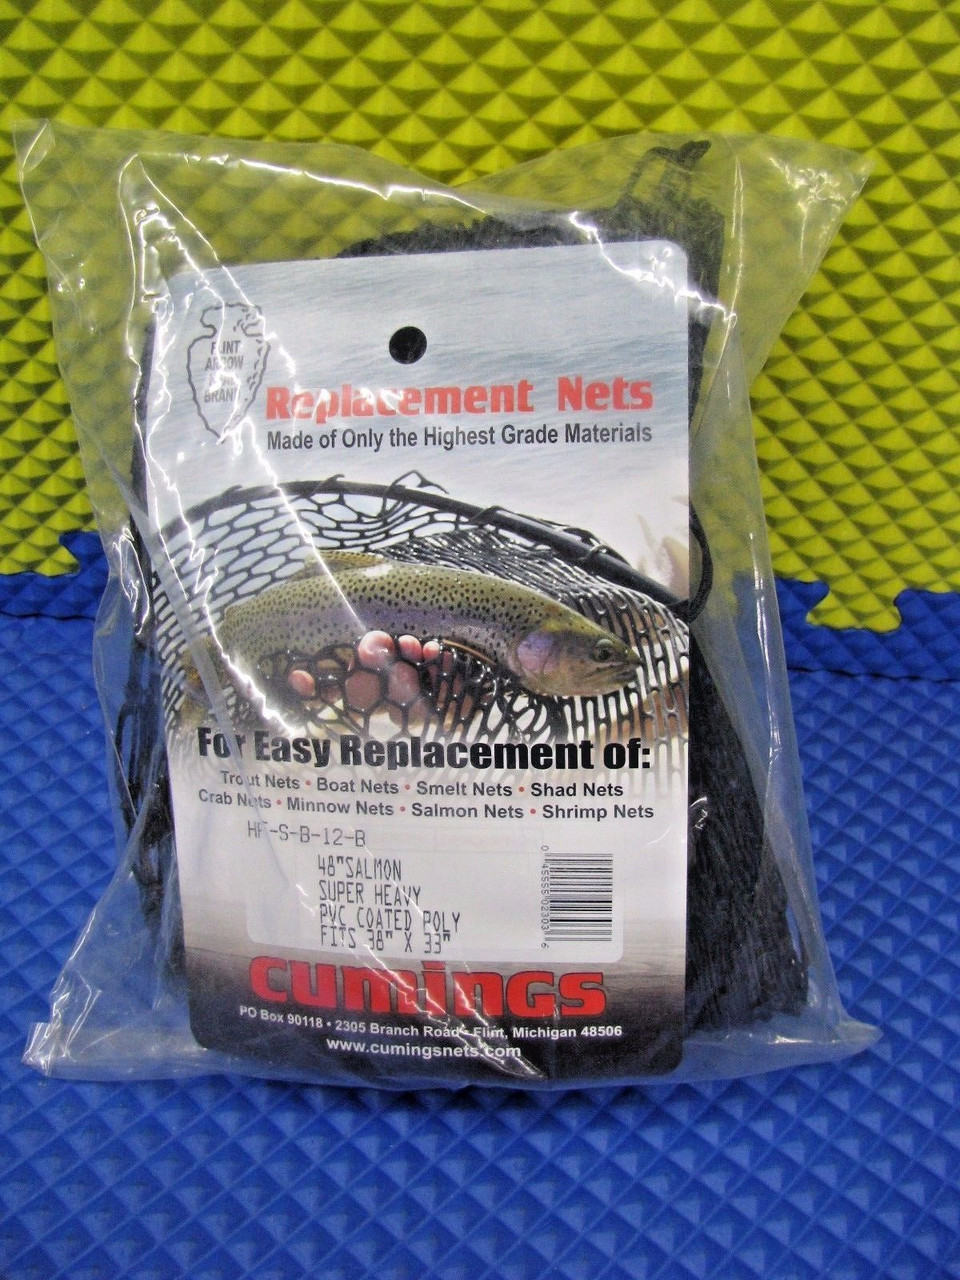 ED CUMINGS PVC COATED KNOTLESS FLAT BOTTOM REPLACEMENT NETS, Landing Nets